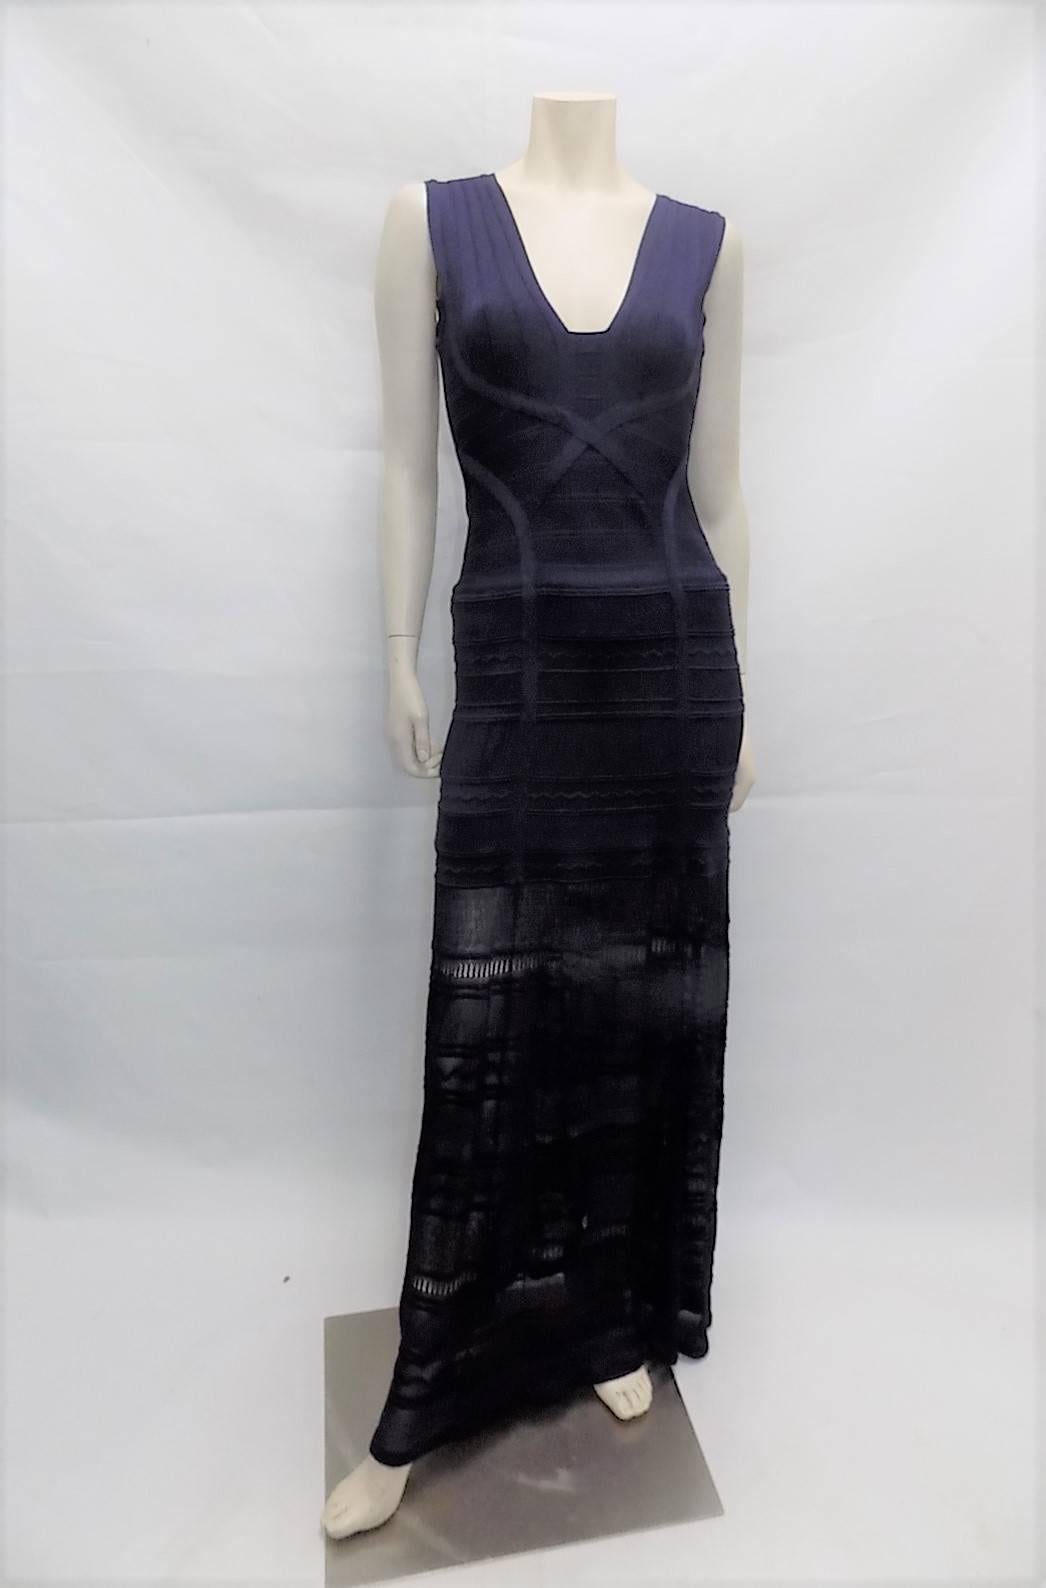 Elevate your eveningwear with this modern design. The banded bodice features deep neckline while pointelle-stitched panels lend a fluid finish to the bandage skirt. Deep  navy blue color. Pristine condition. Size Medium

    Concealed back zipper